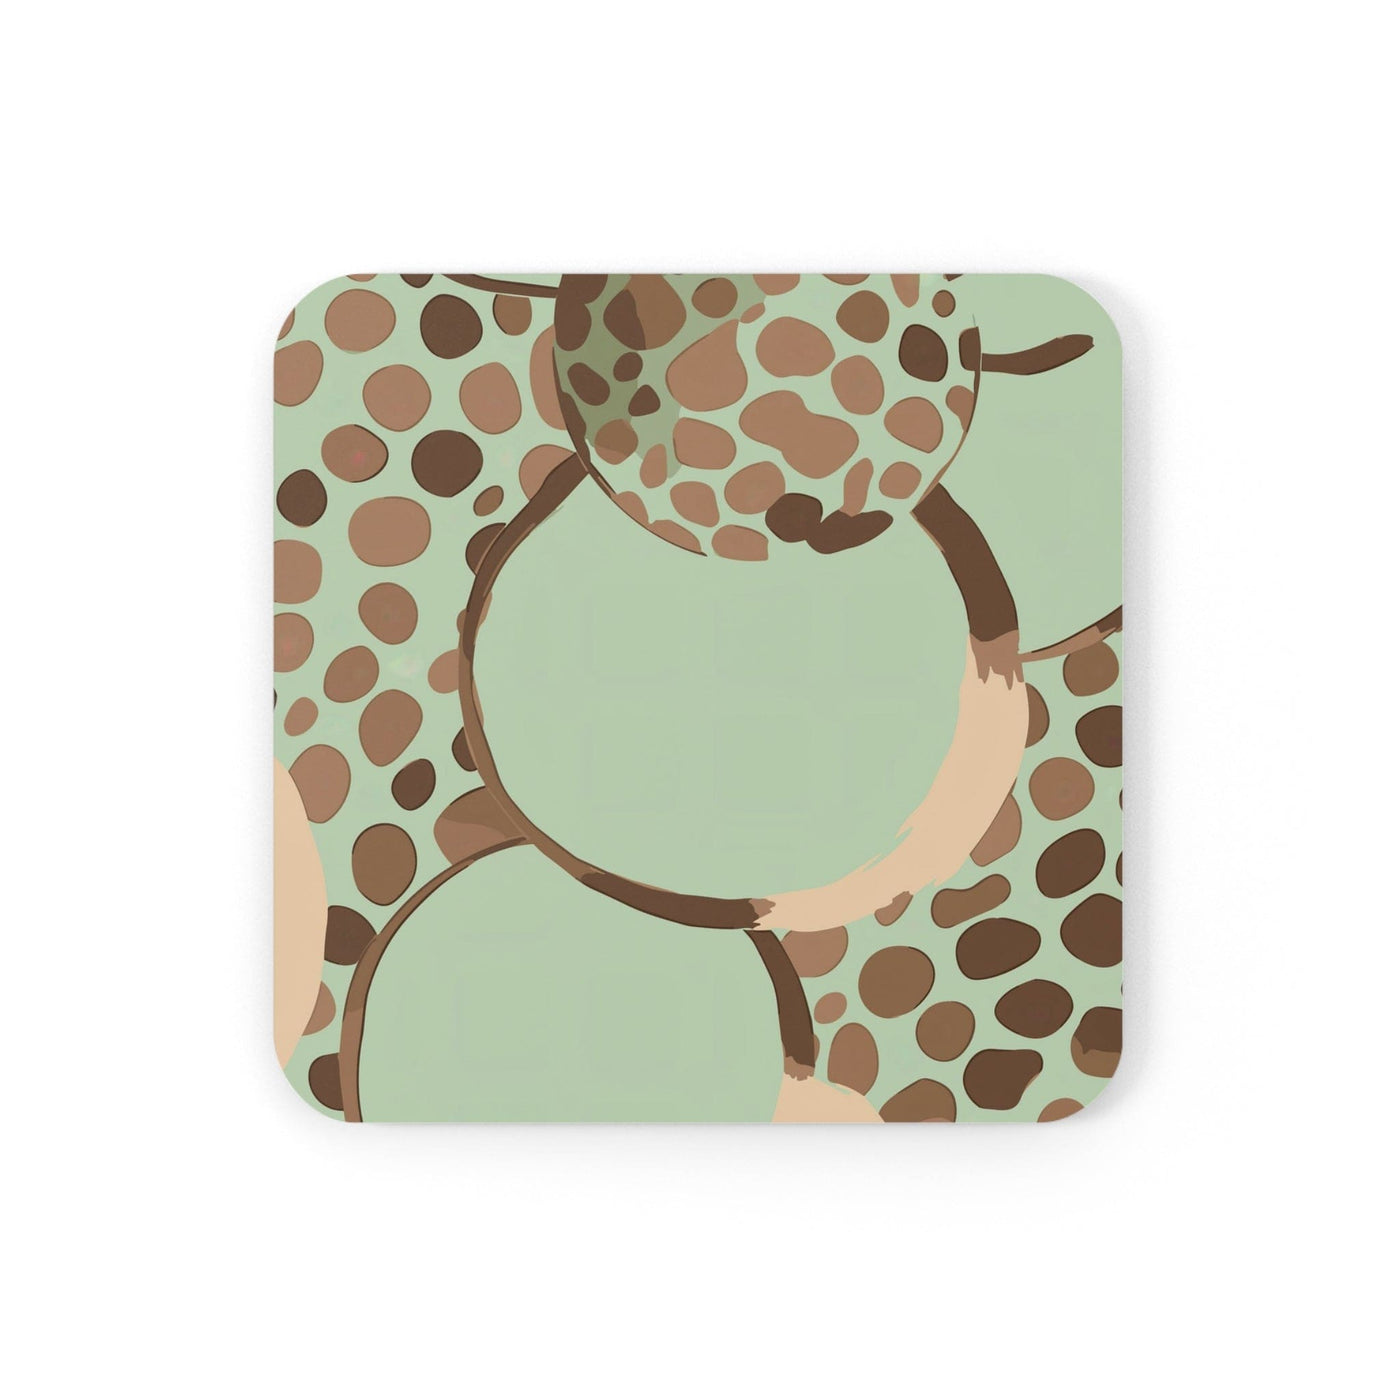 Coaster Set Of 4 For Drinks Mint Green And Brown Spotted Illustration